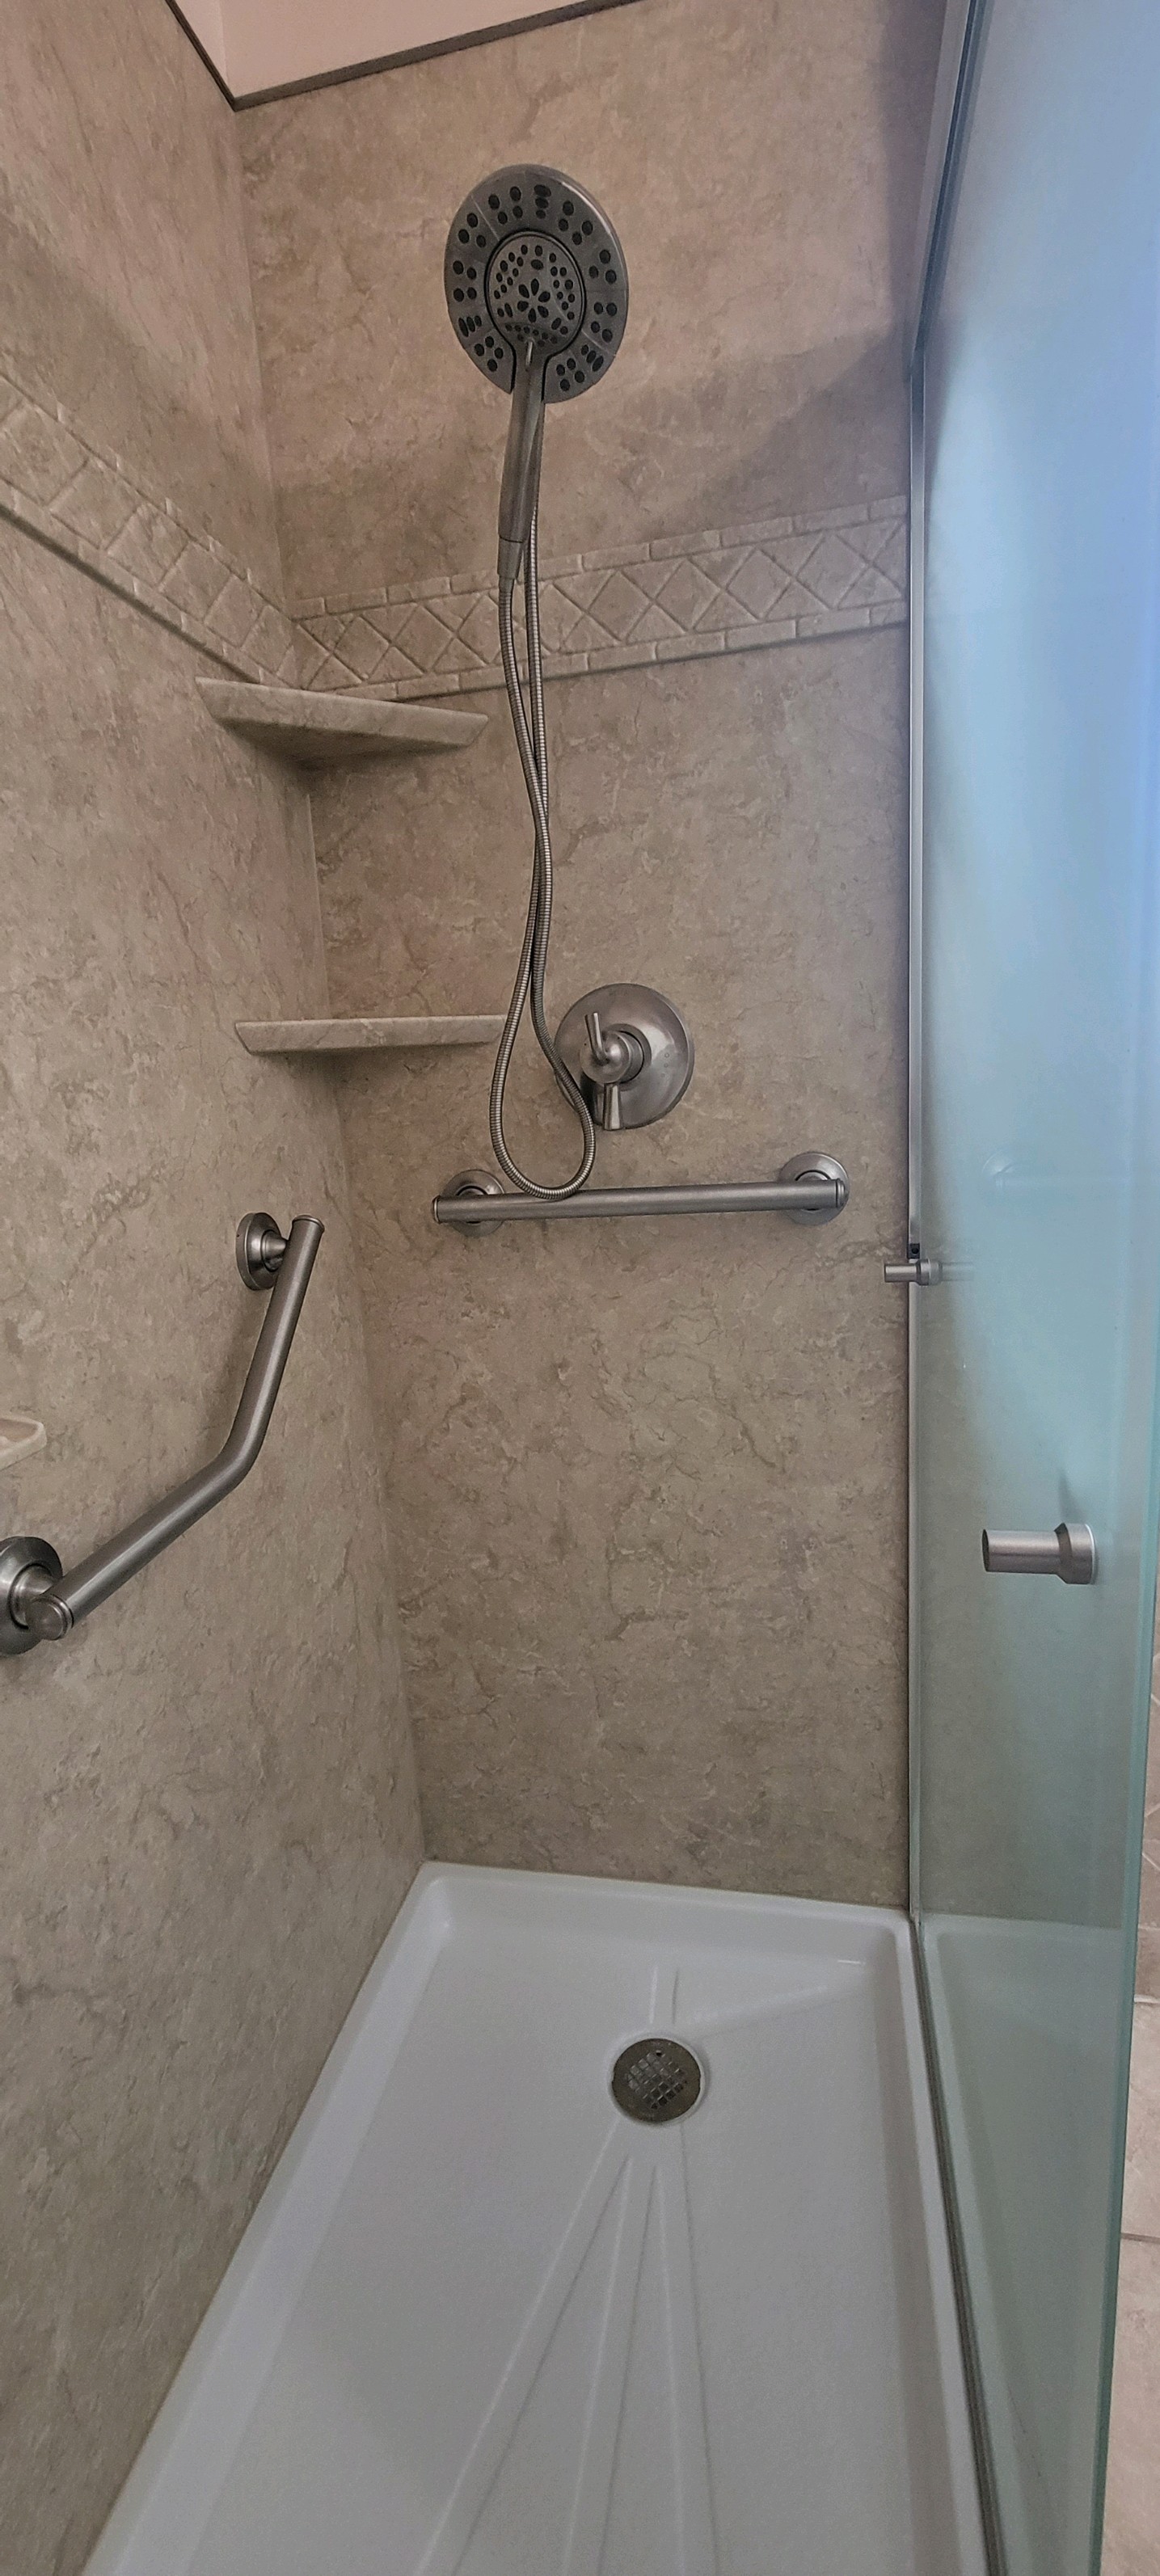 After, Frosted shower doors on walk in shower